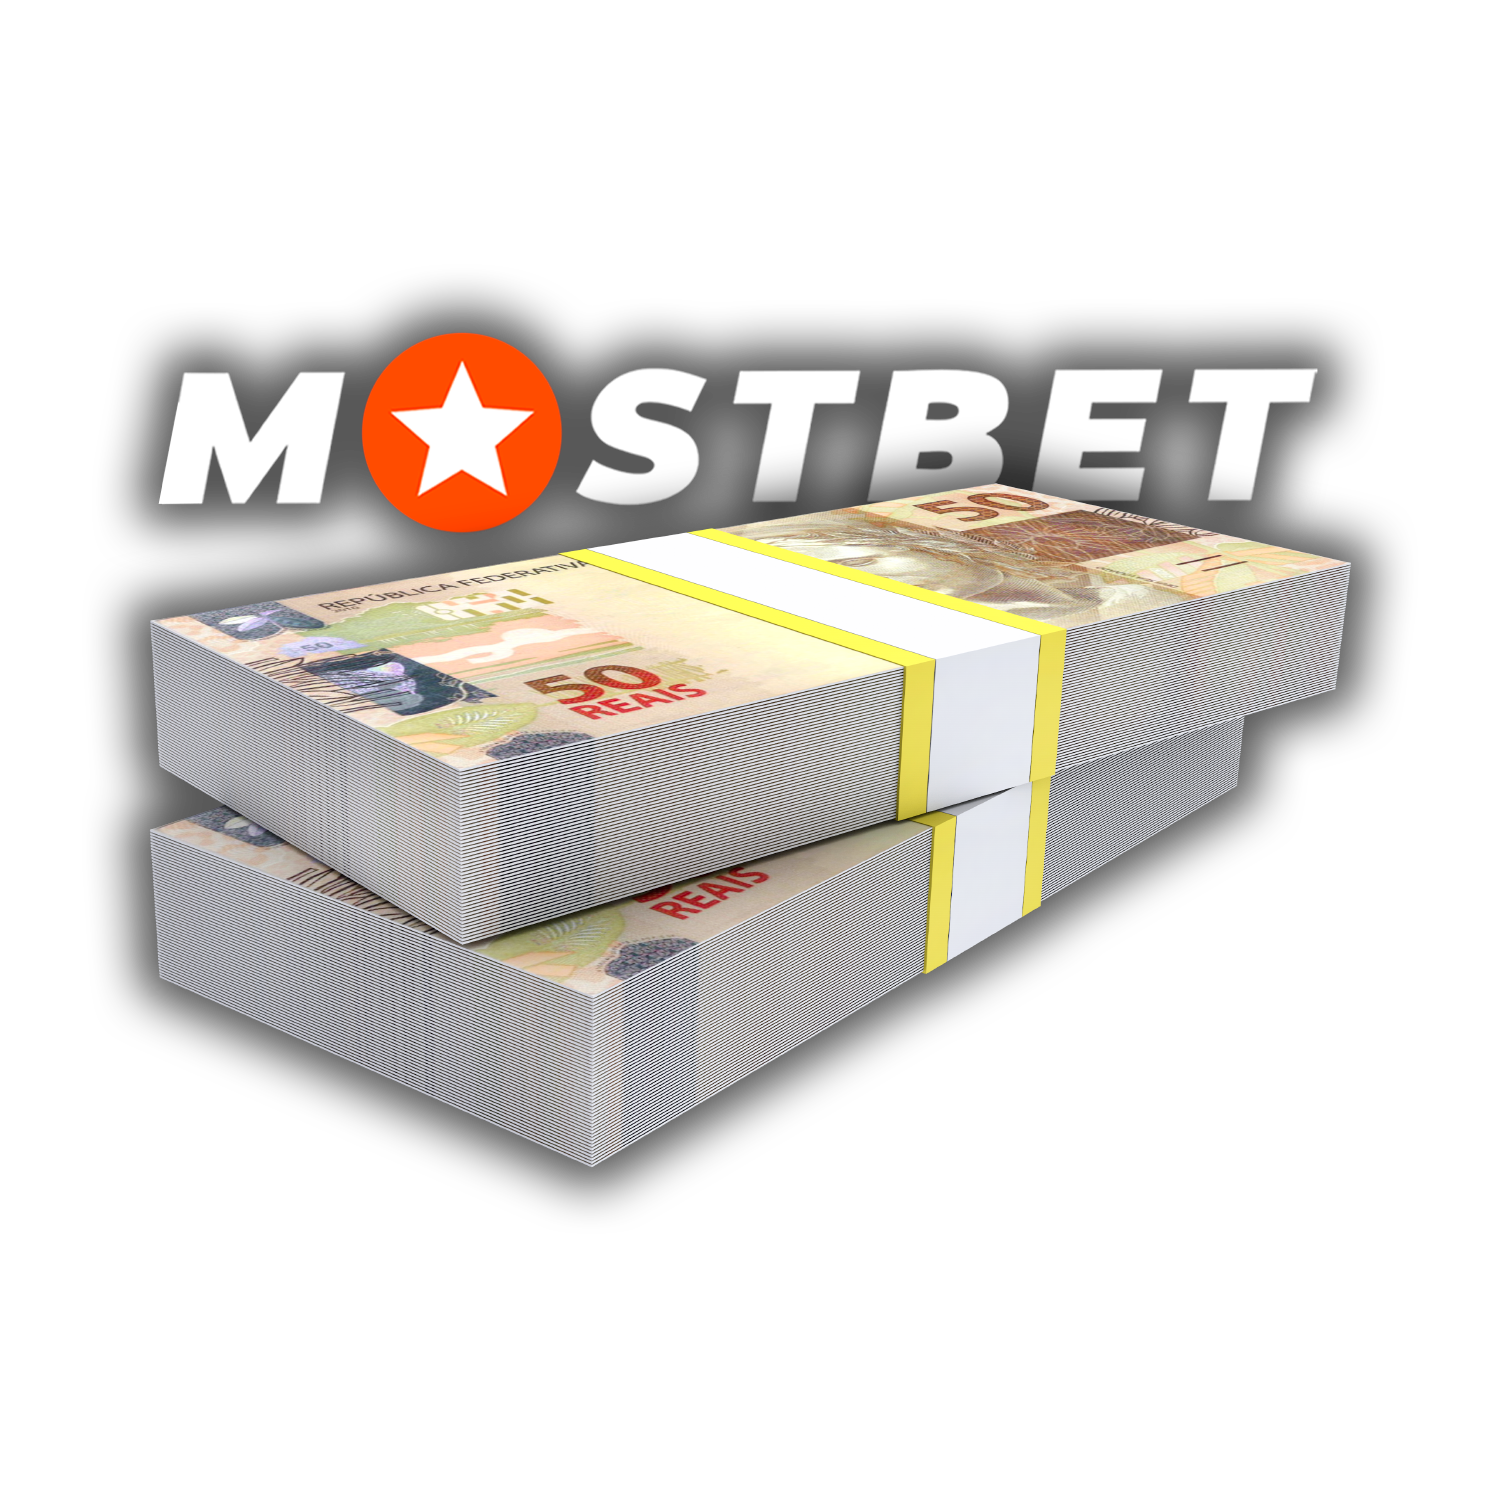 Find out how to make your first deposit at Mostbet.